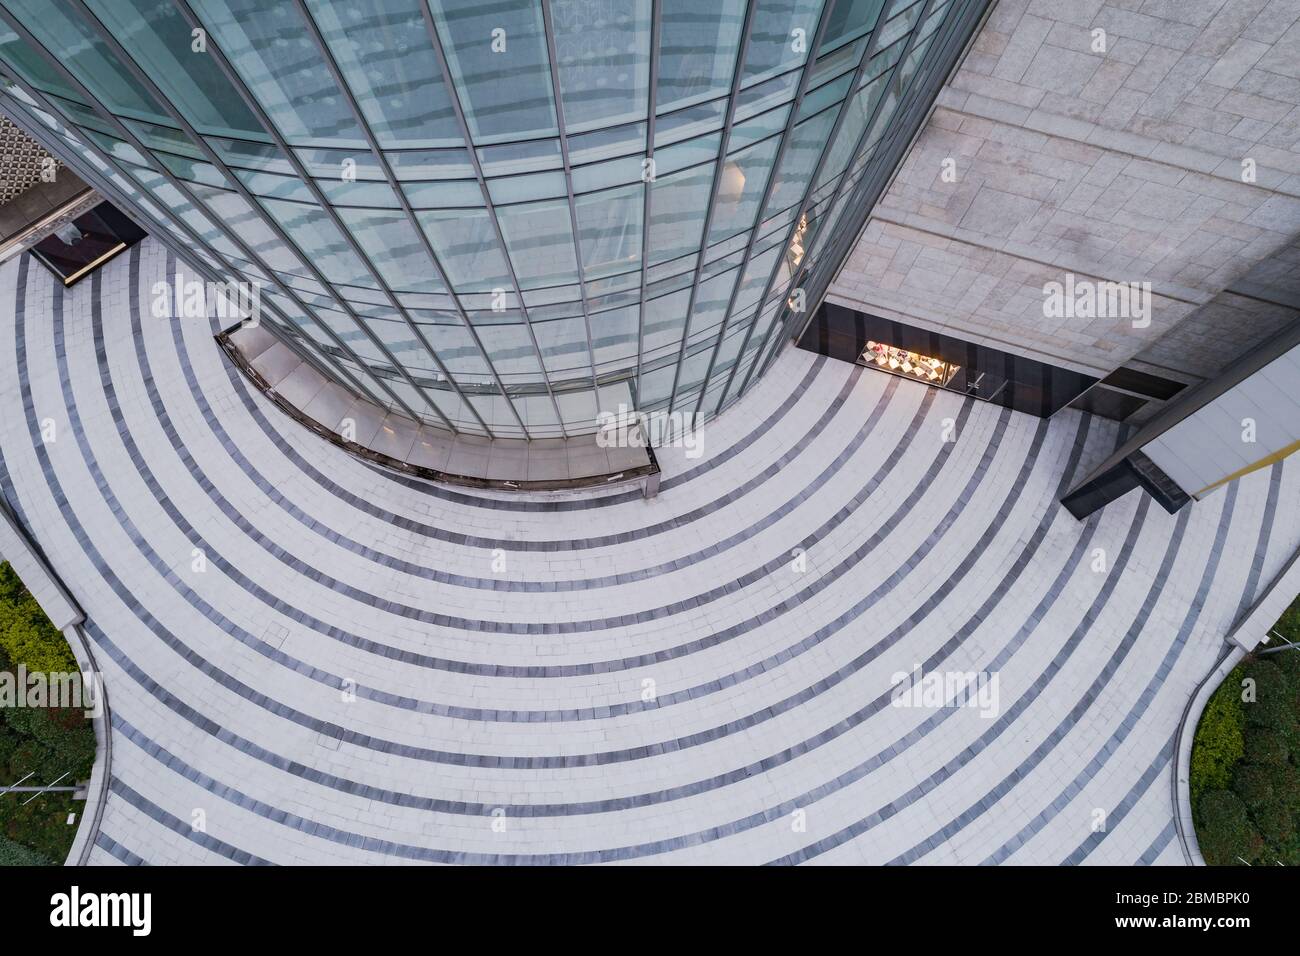 aerial view of entrance ground of modern building Stock Photo